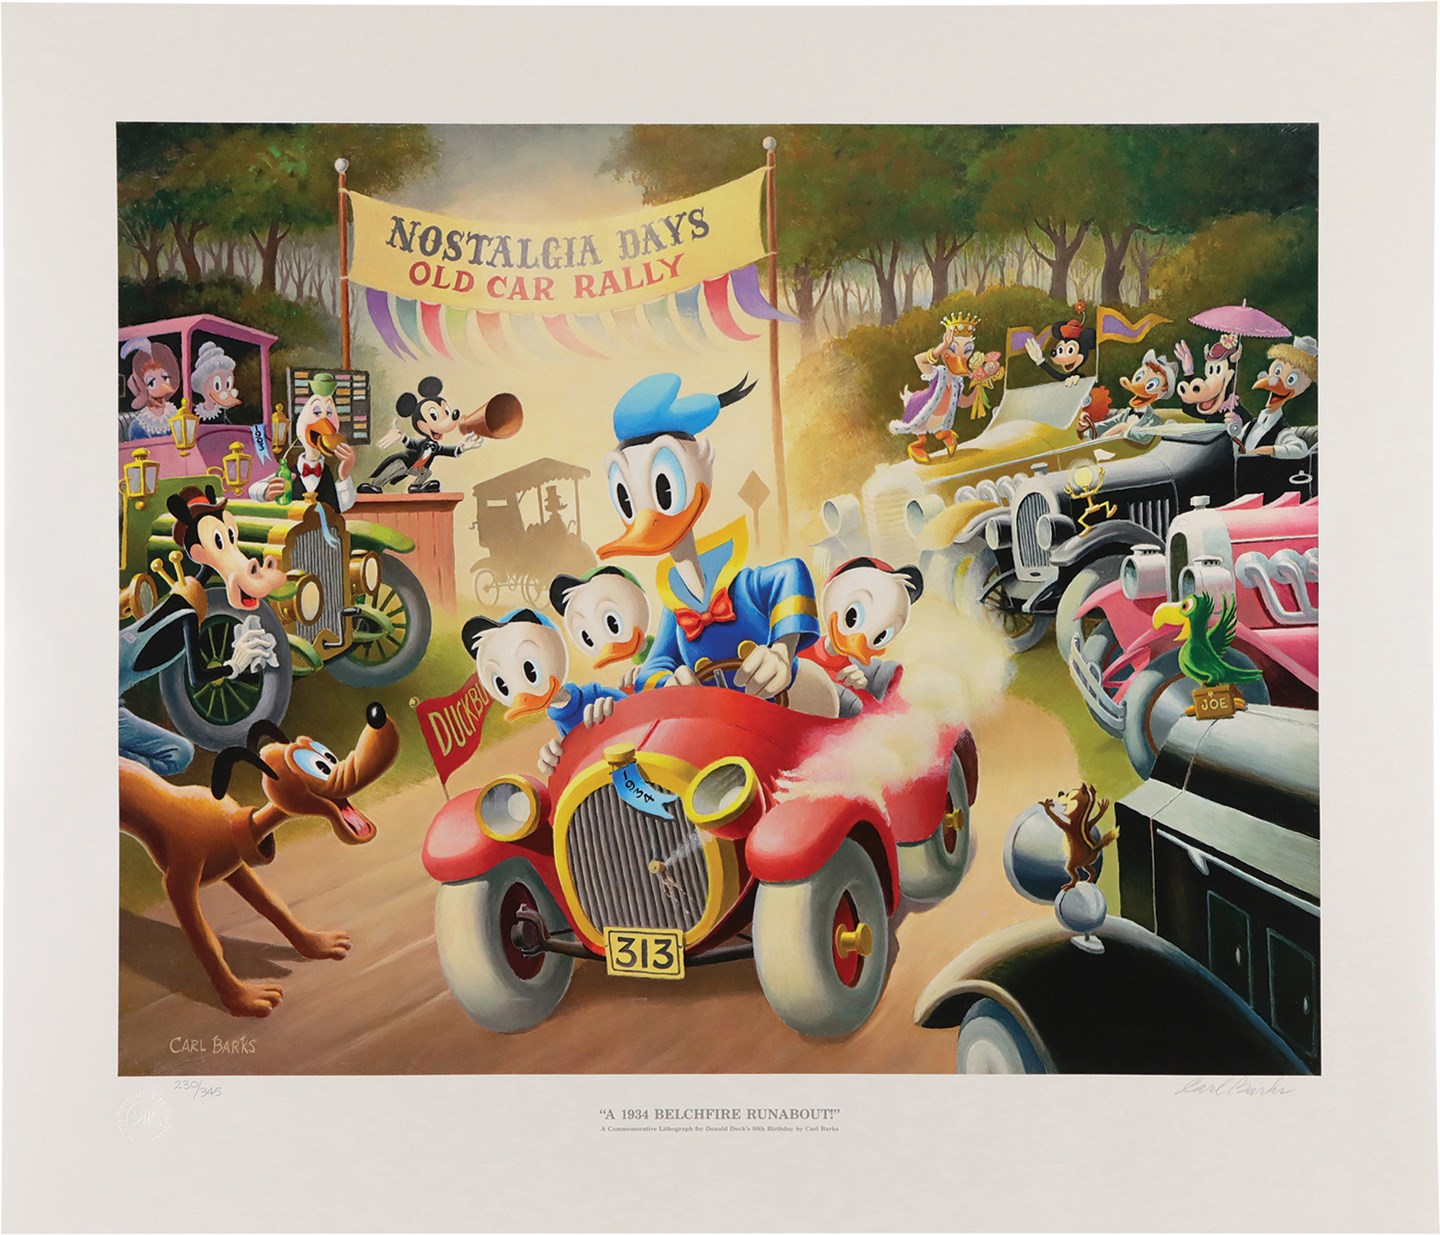 Rock And Pop Culture - Signed 1984 Carl Barks "A 1934 Belchfire Runabout" Limited Edition Lithograph (230/345)